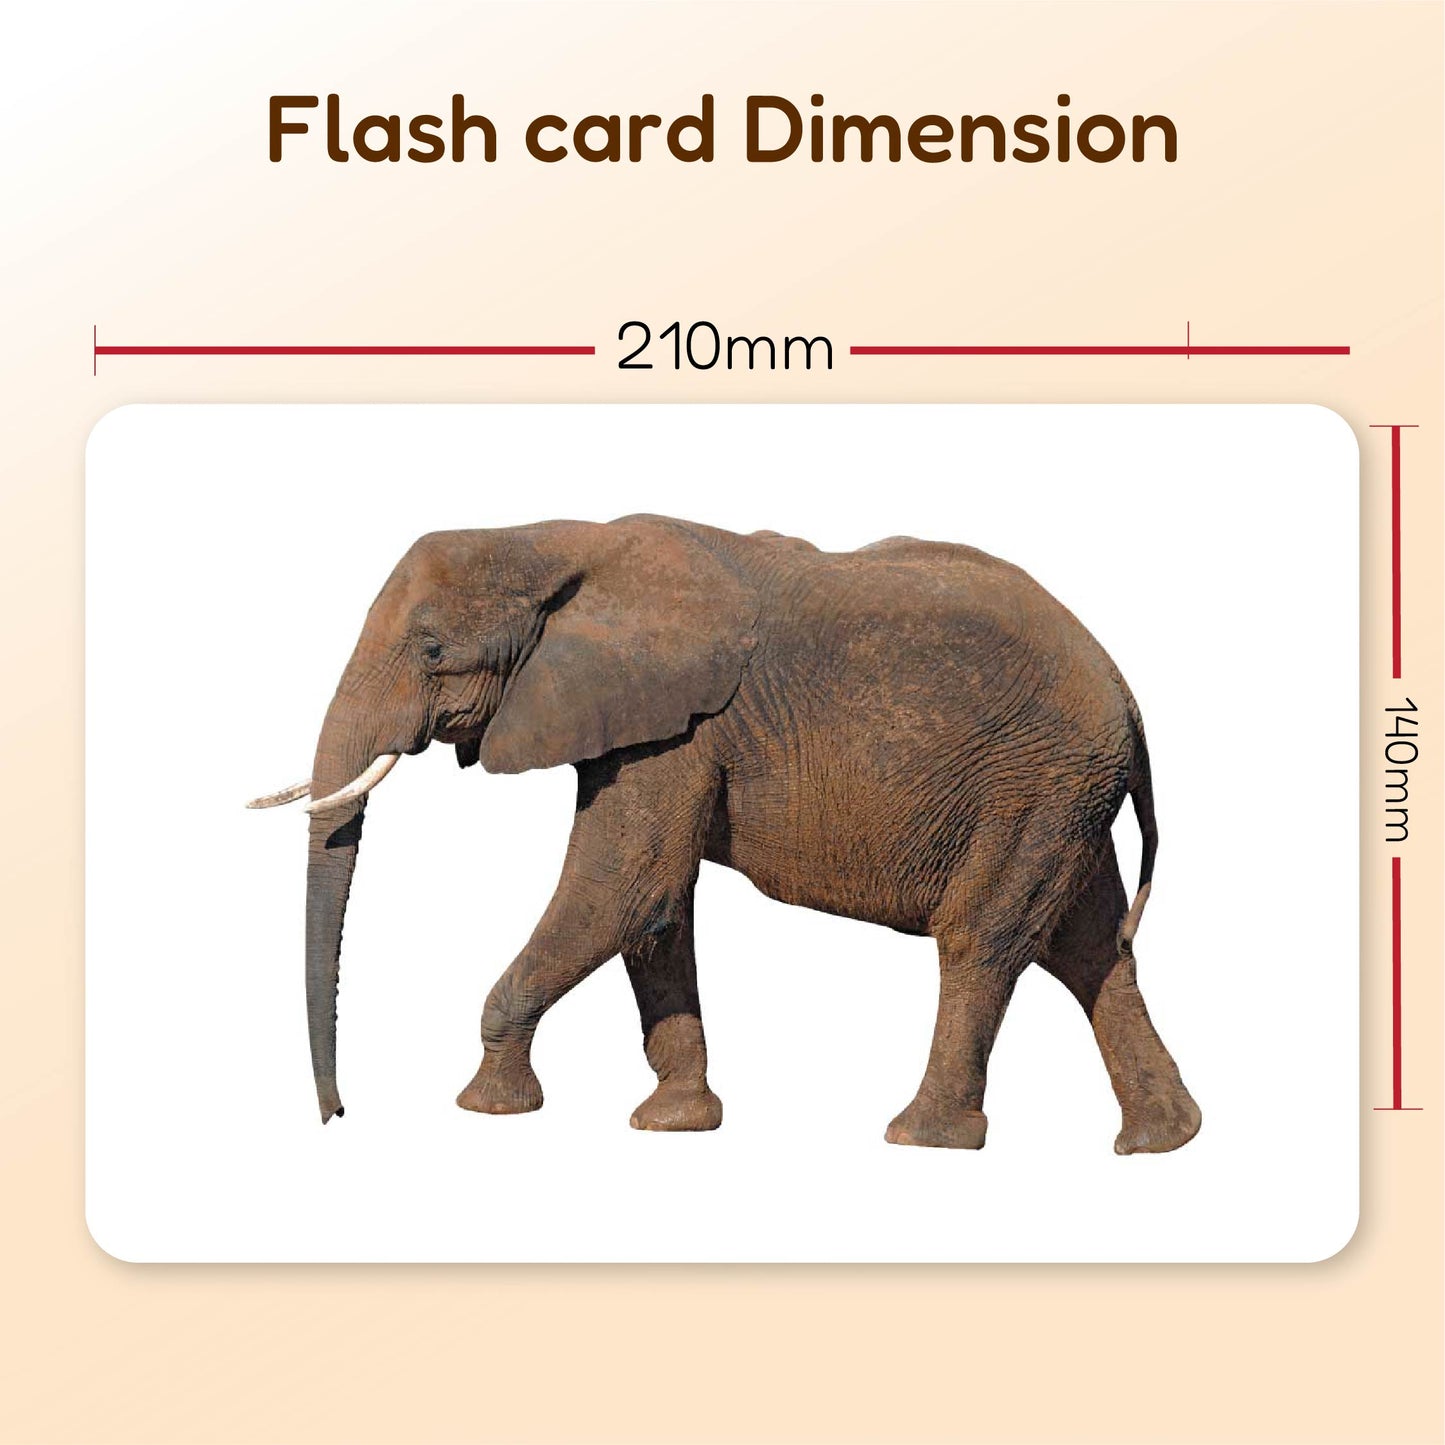 Hungry Brain Domestic Animals Flash Cards